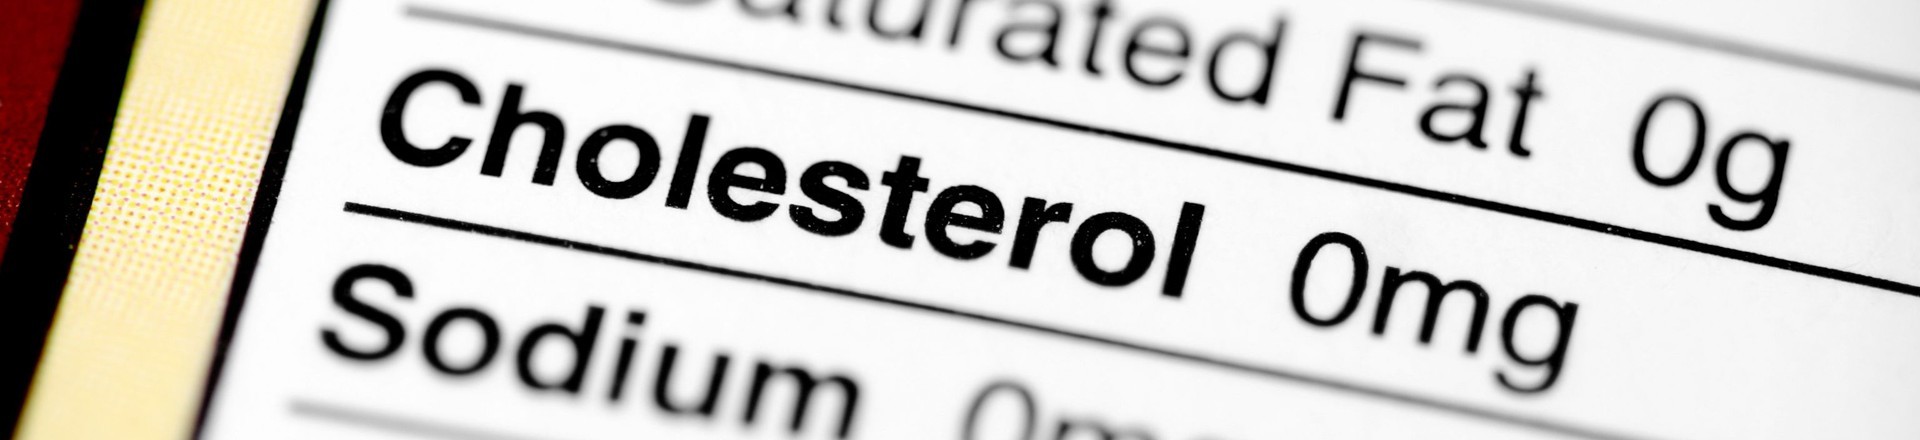 cholesterol facts